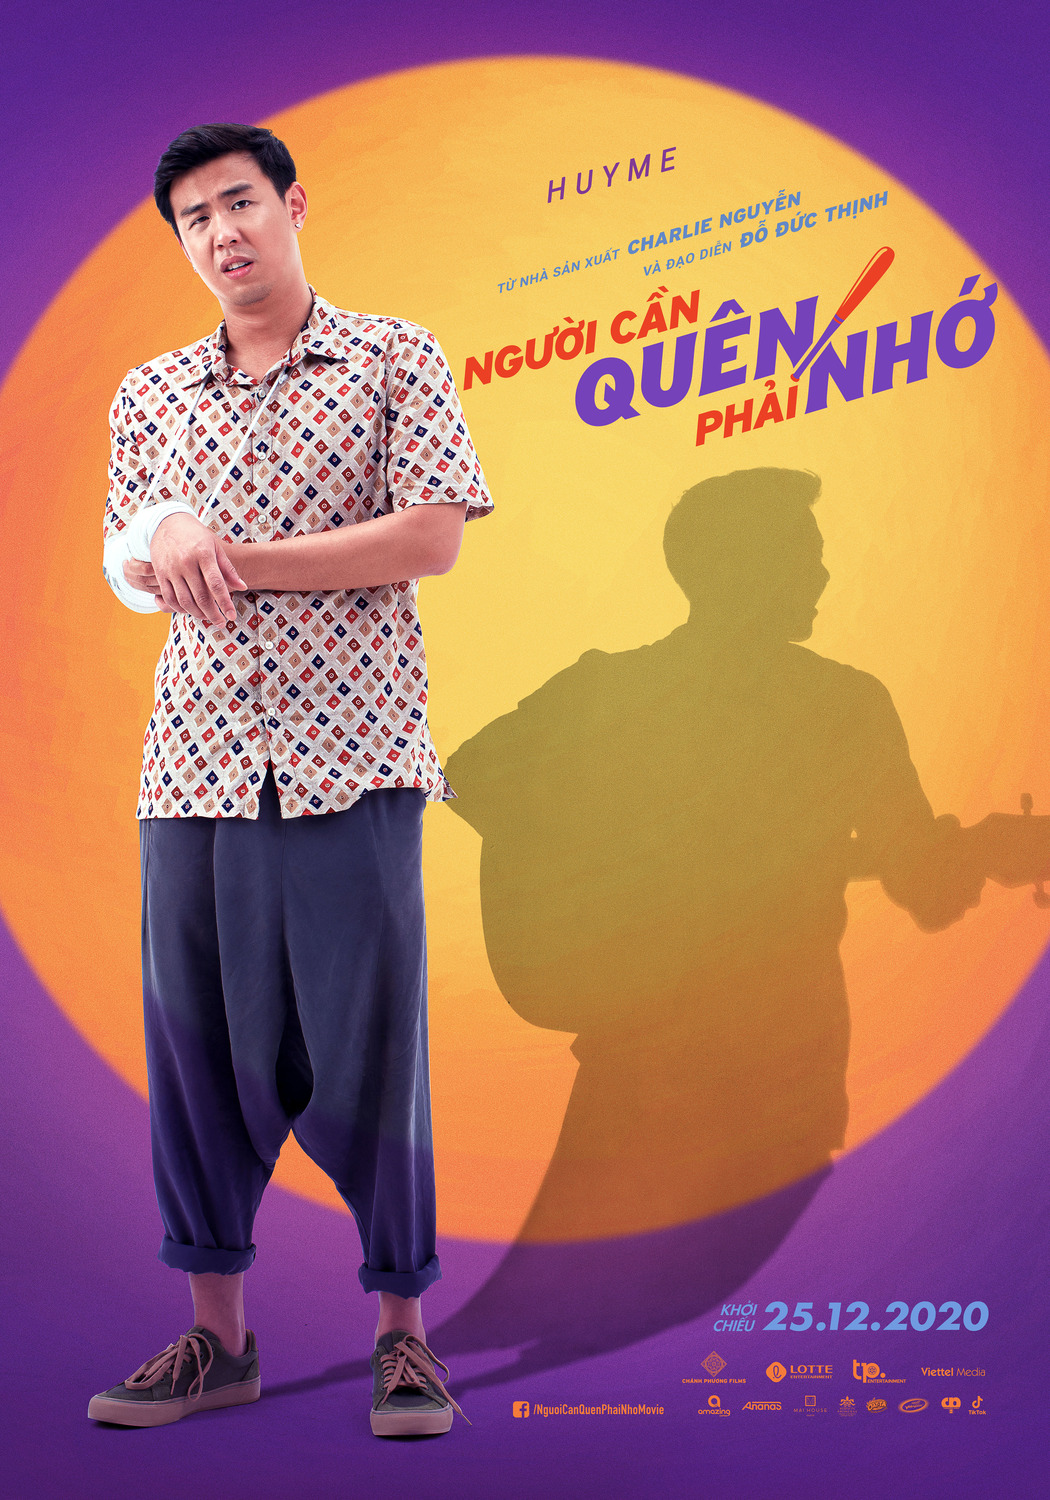 Extra Large Movie Poster Image for Nguoi Can Quen Phai Nho (#7 of 10)